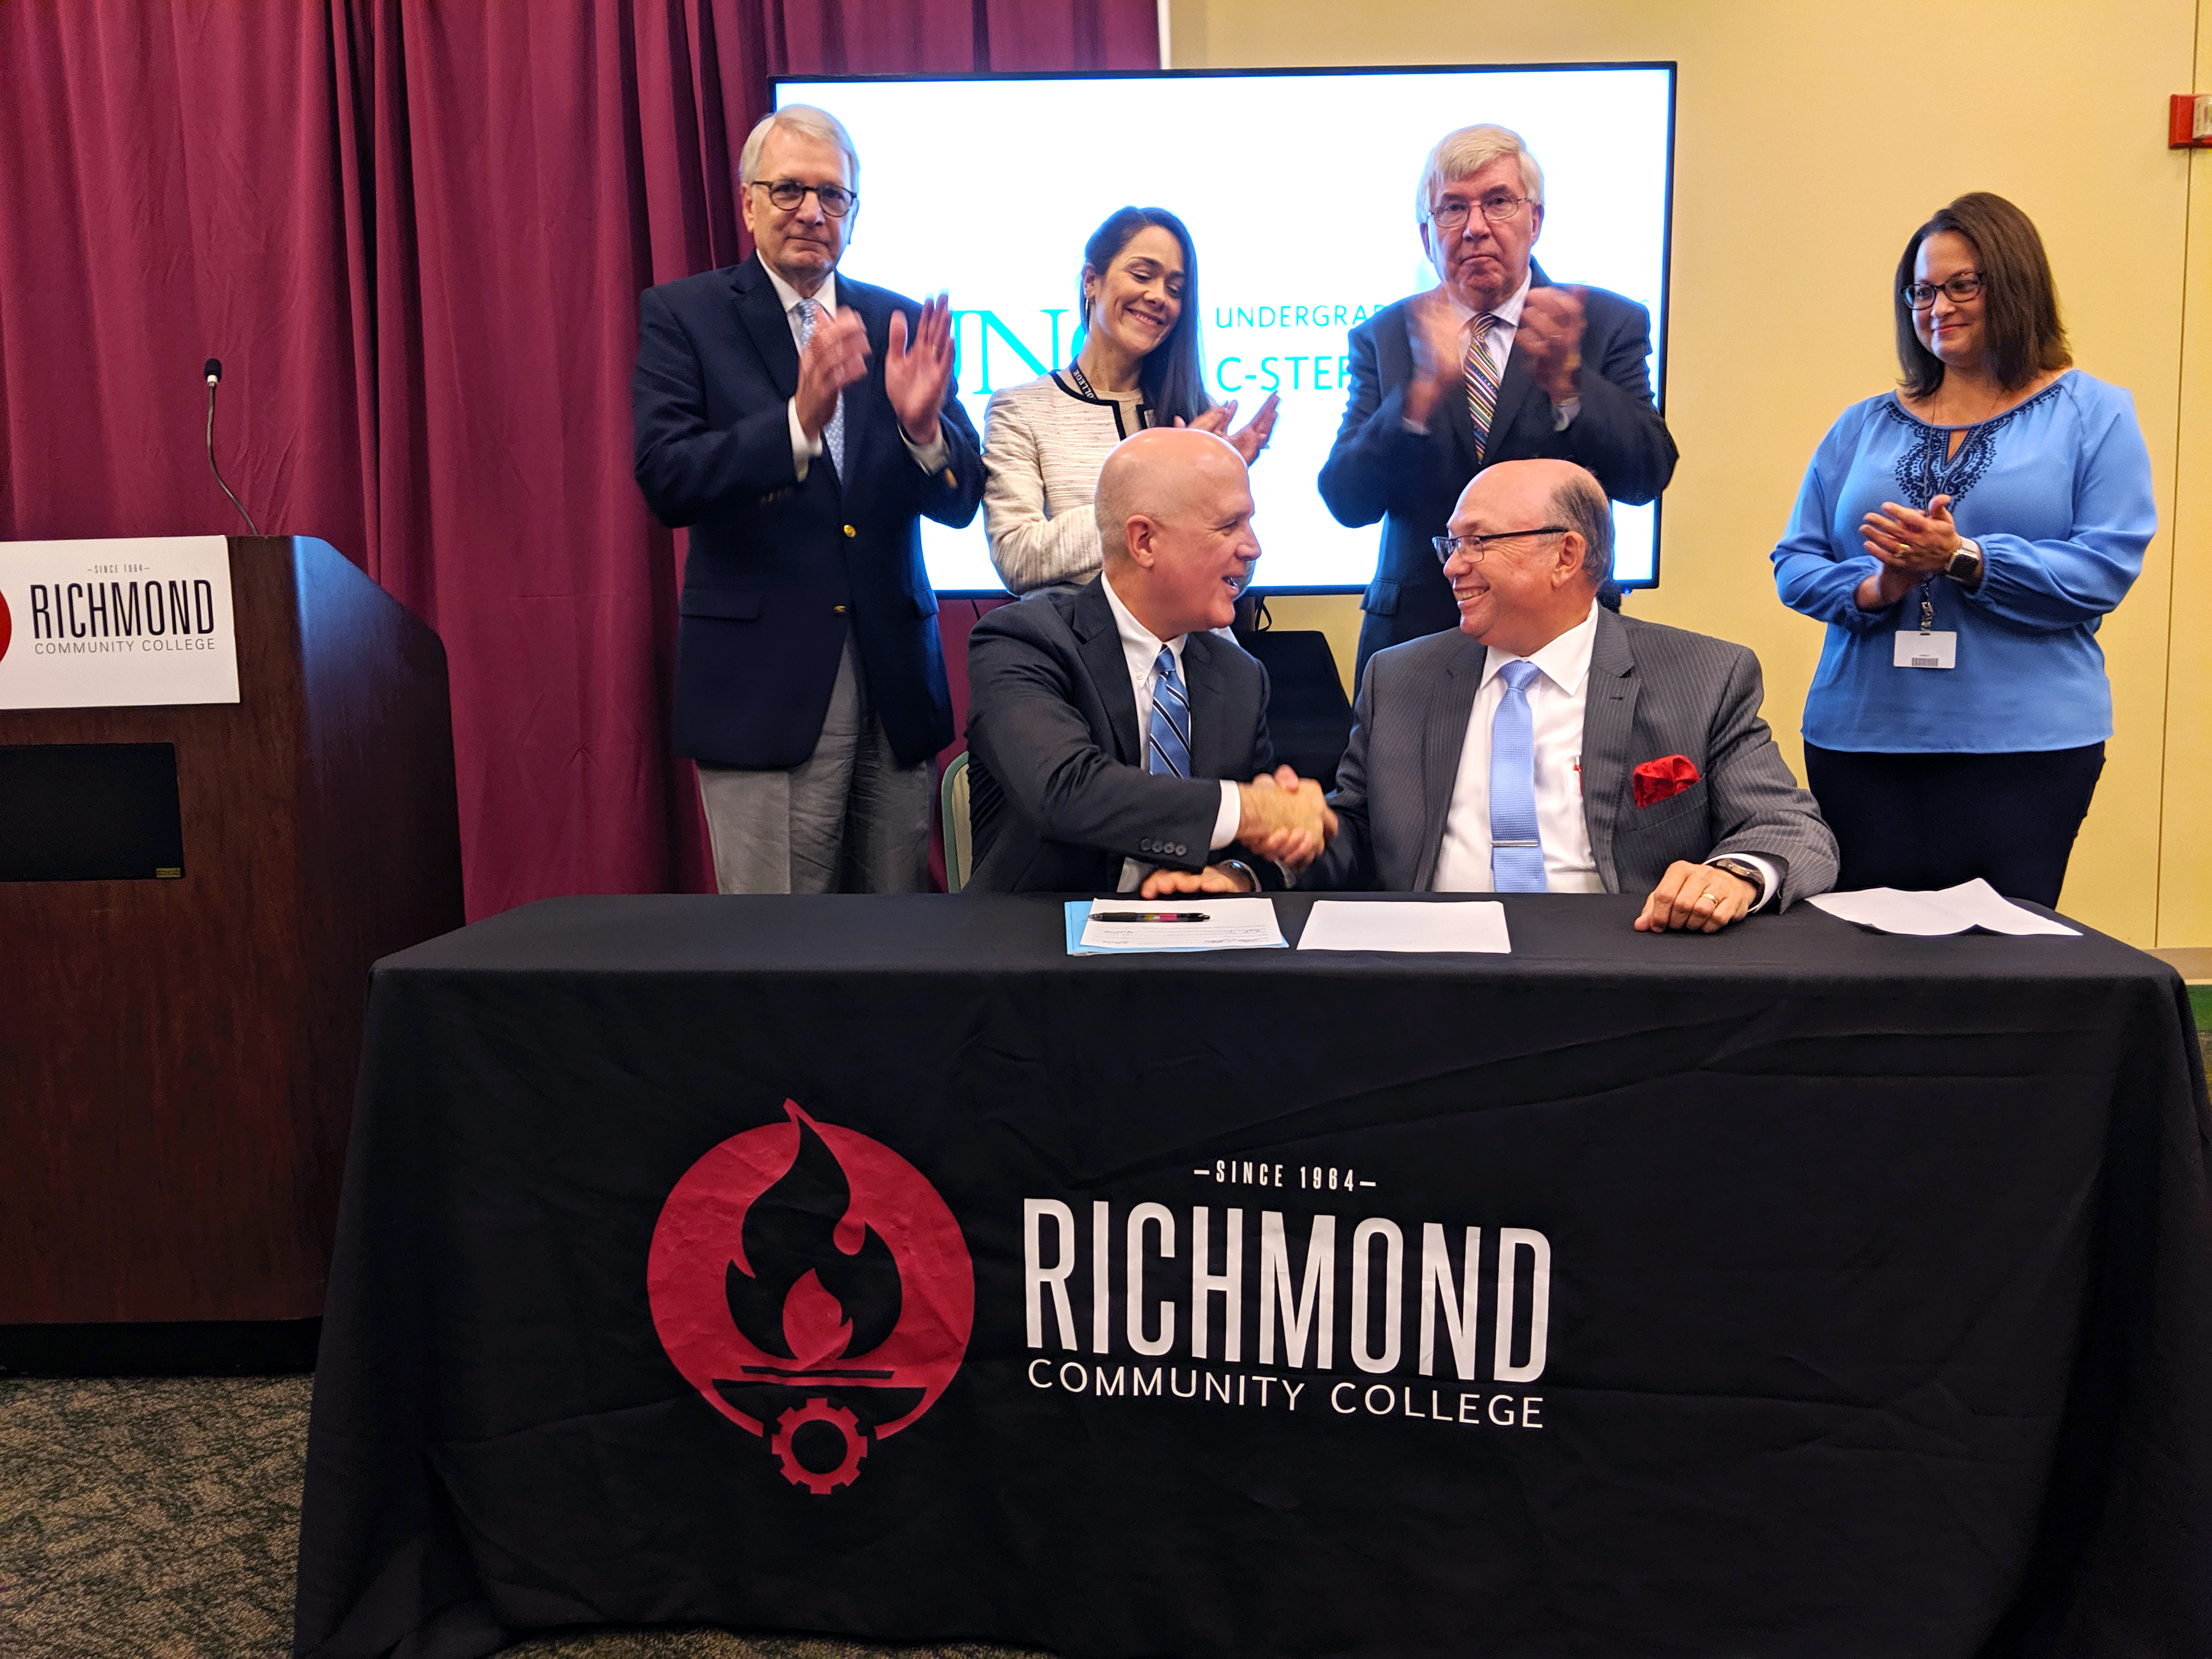 RichmondCC and UNC leaders sit at a table and sign a document while others look on.